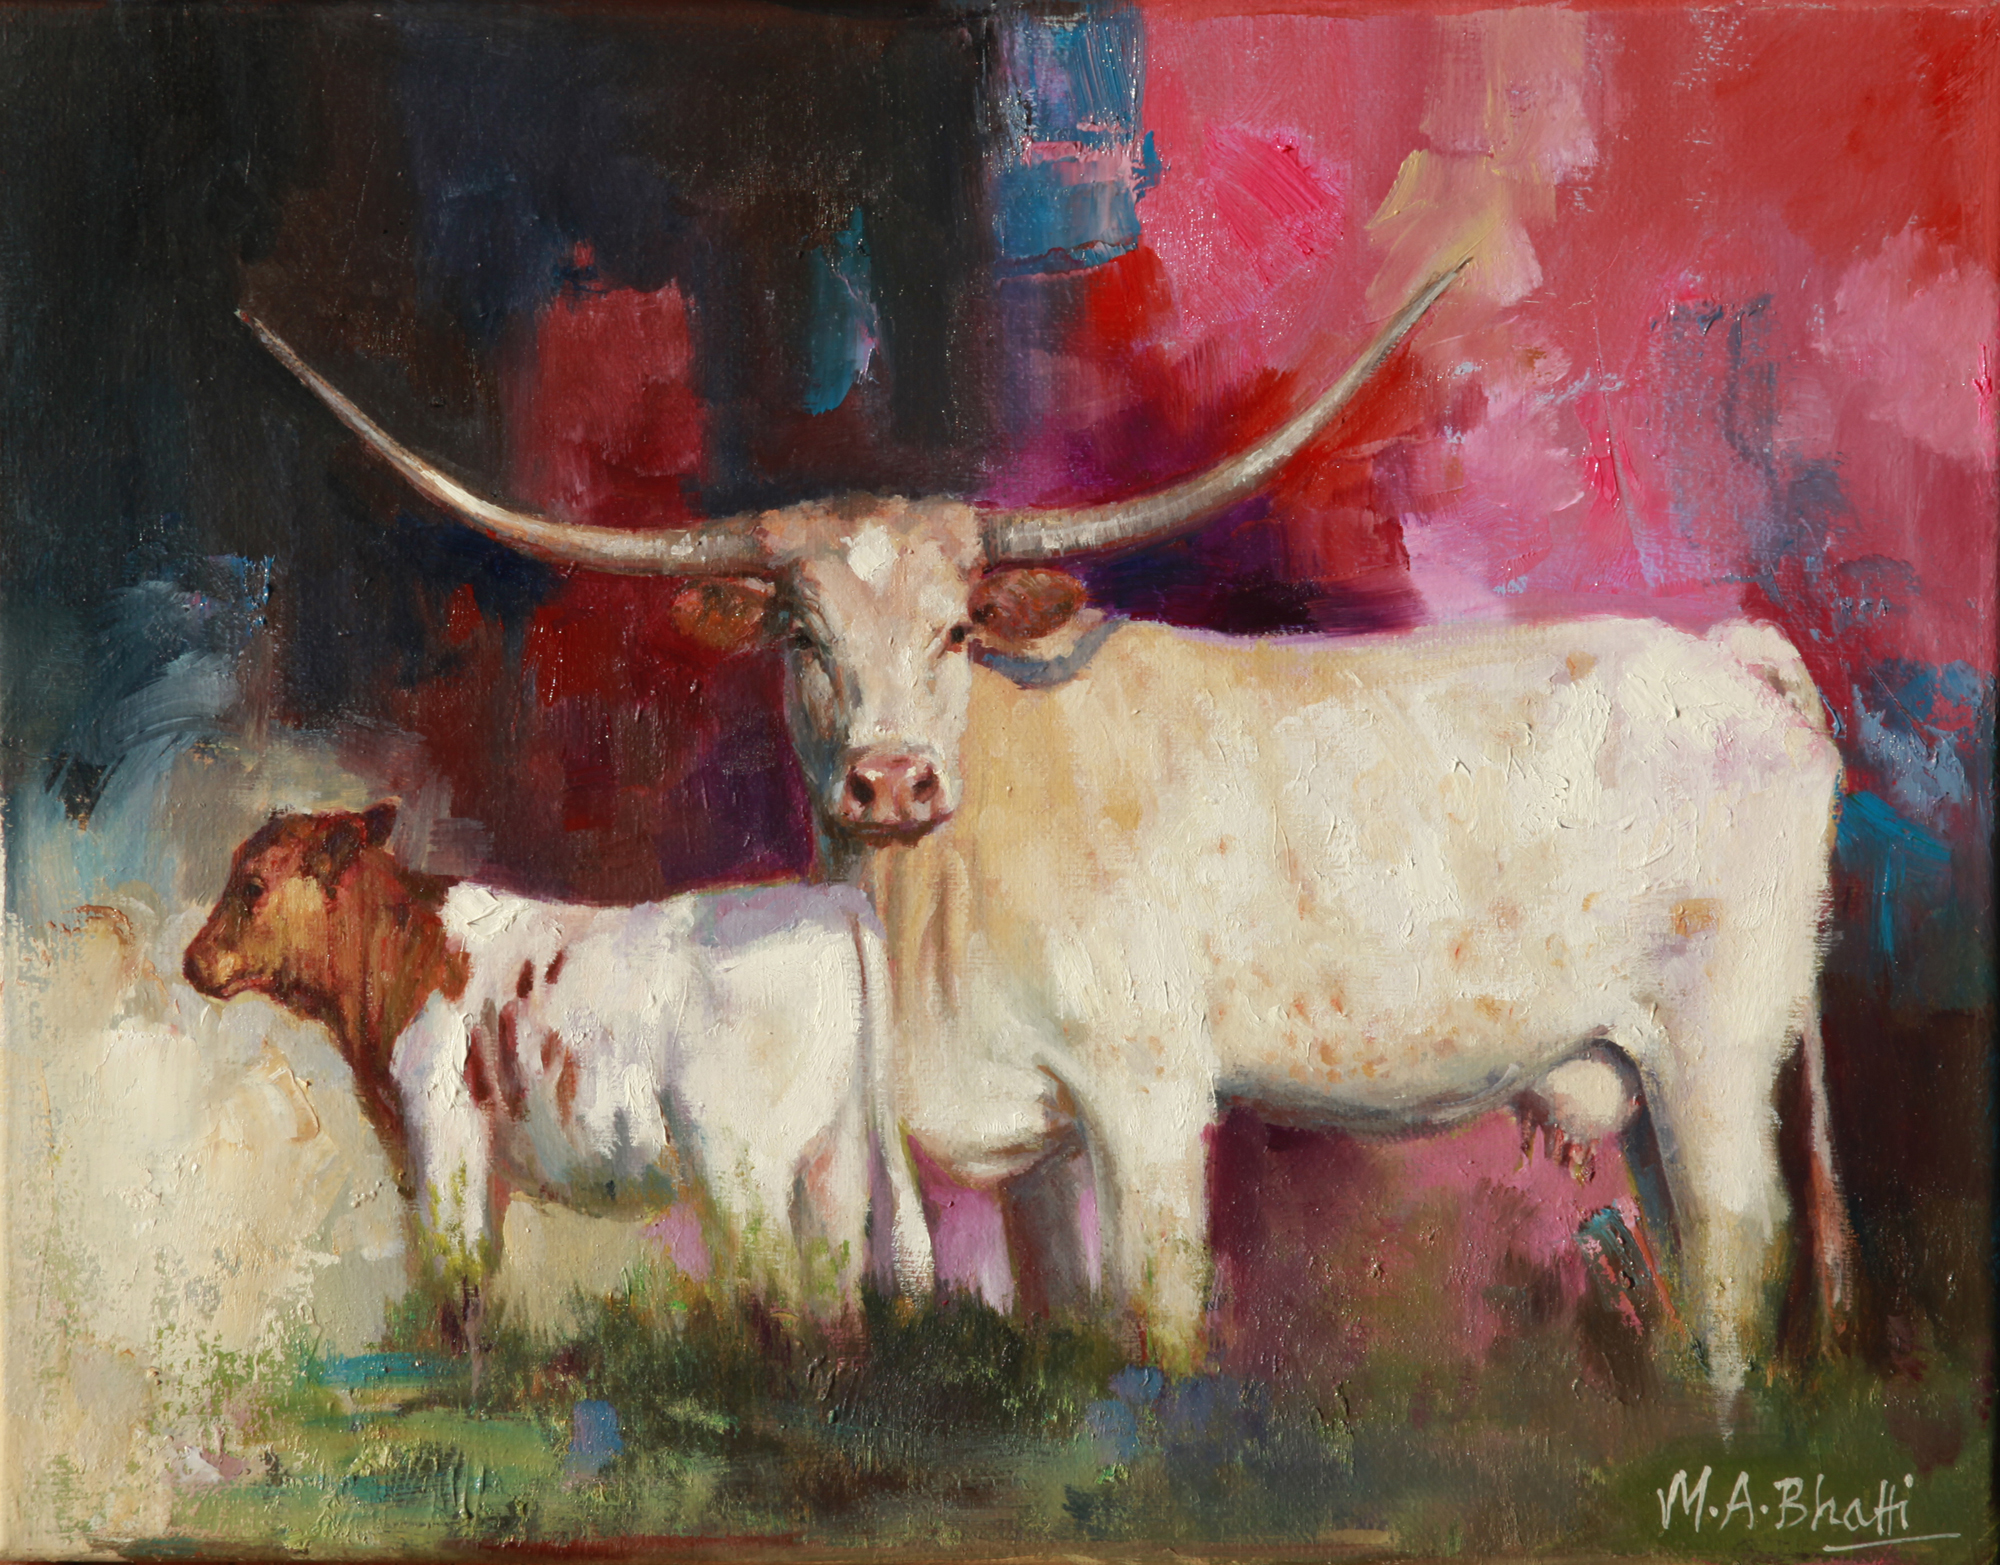 Calf and Mom – Oil on Canvas 11 X 14 ($1,500)